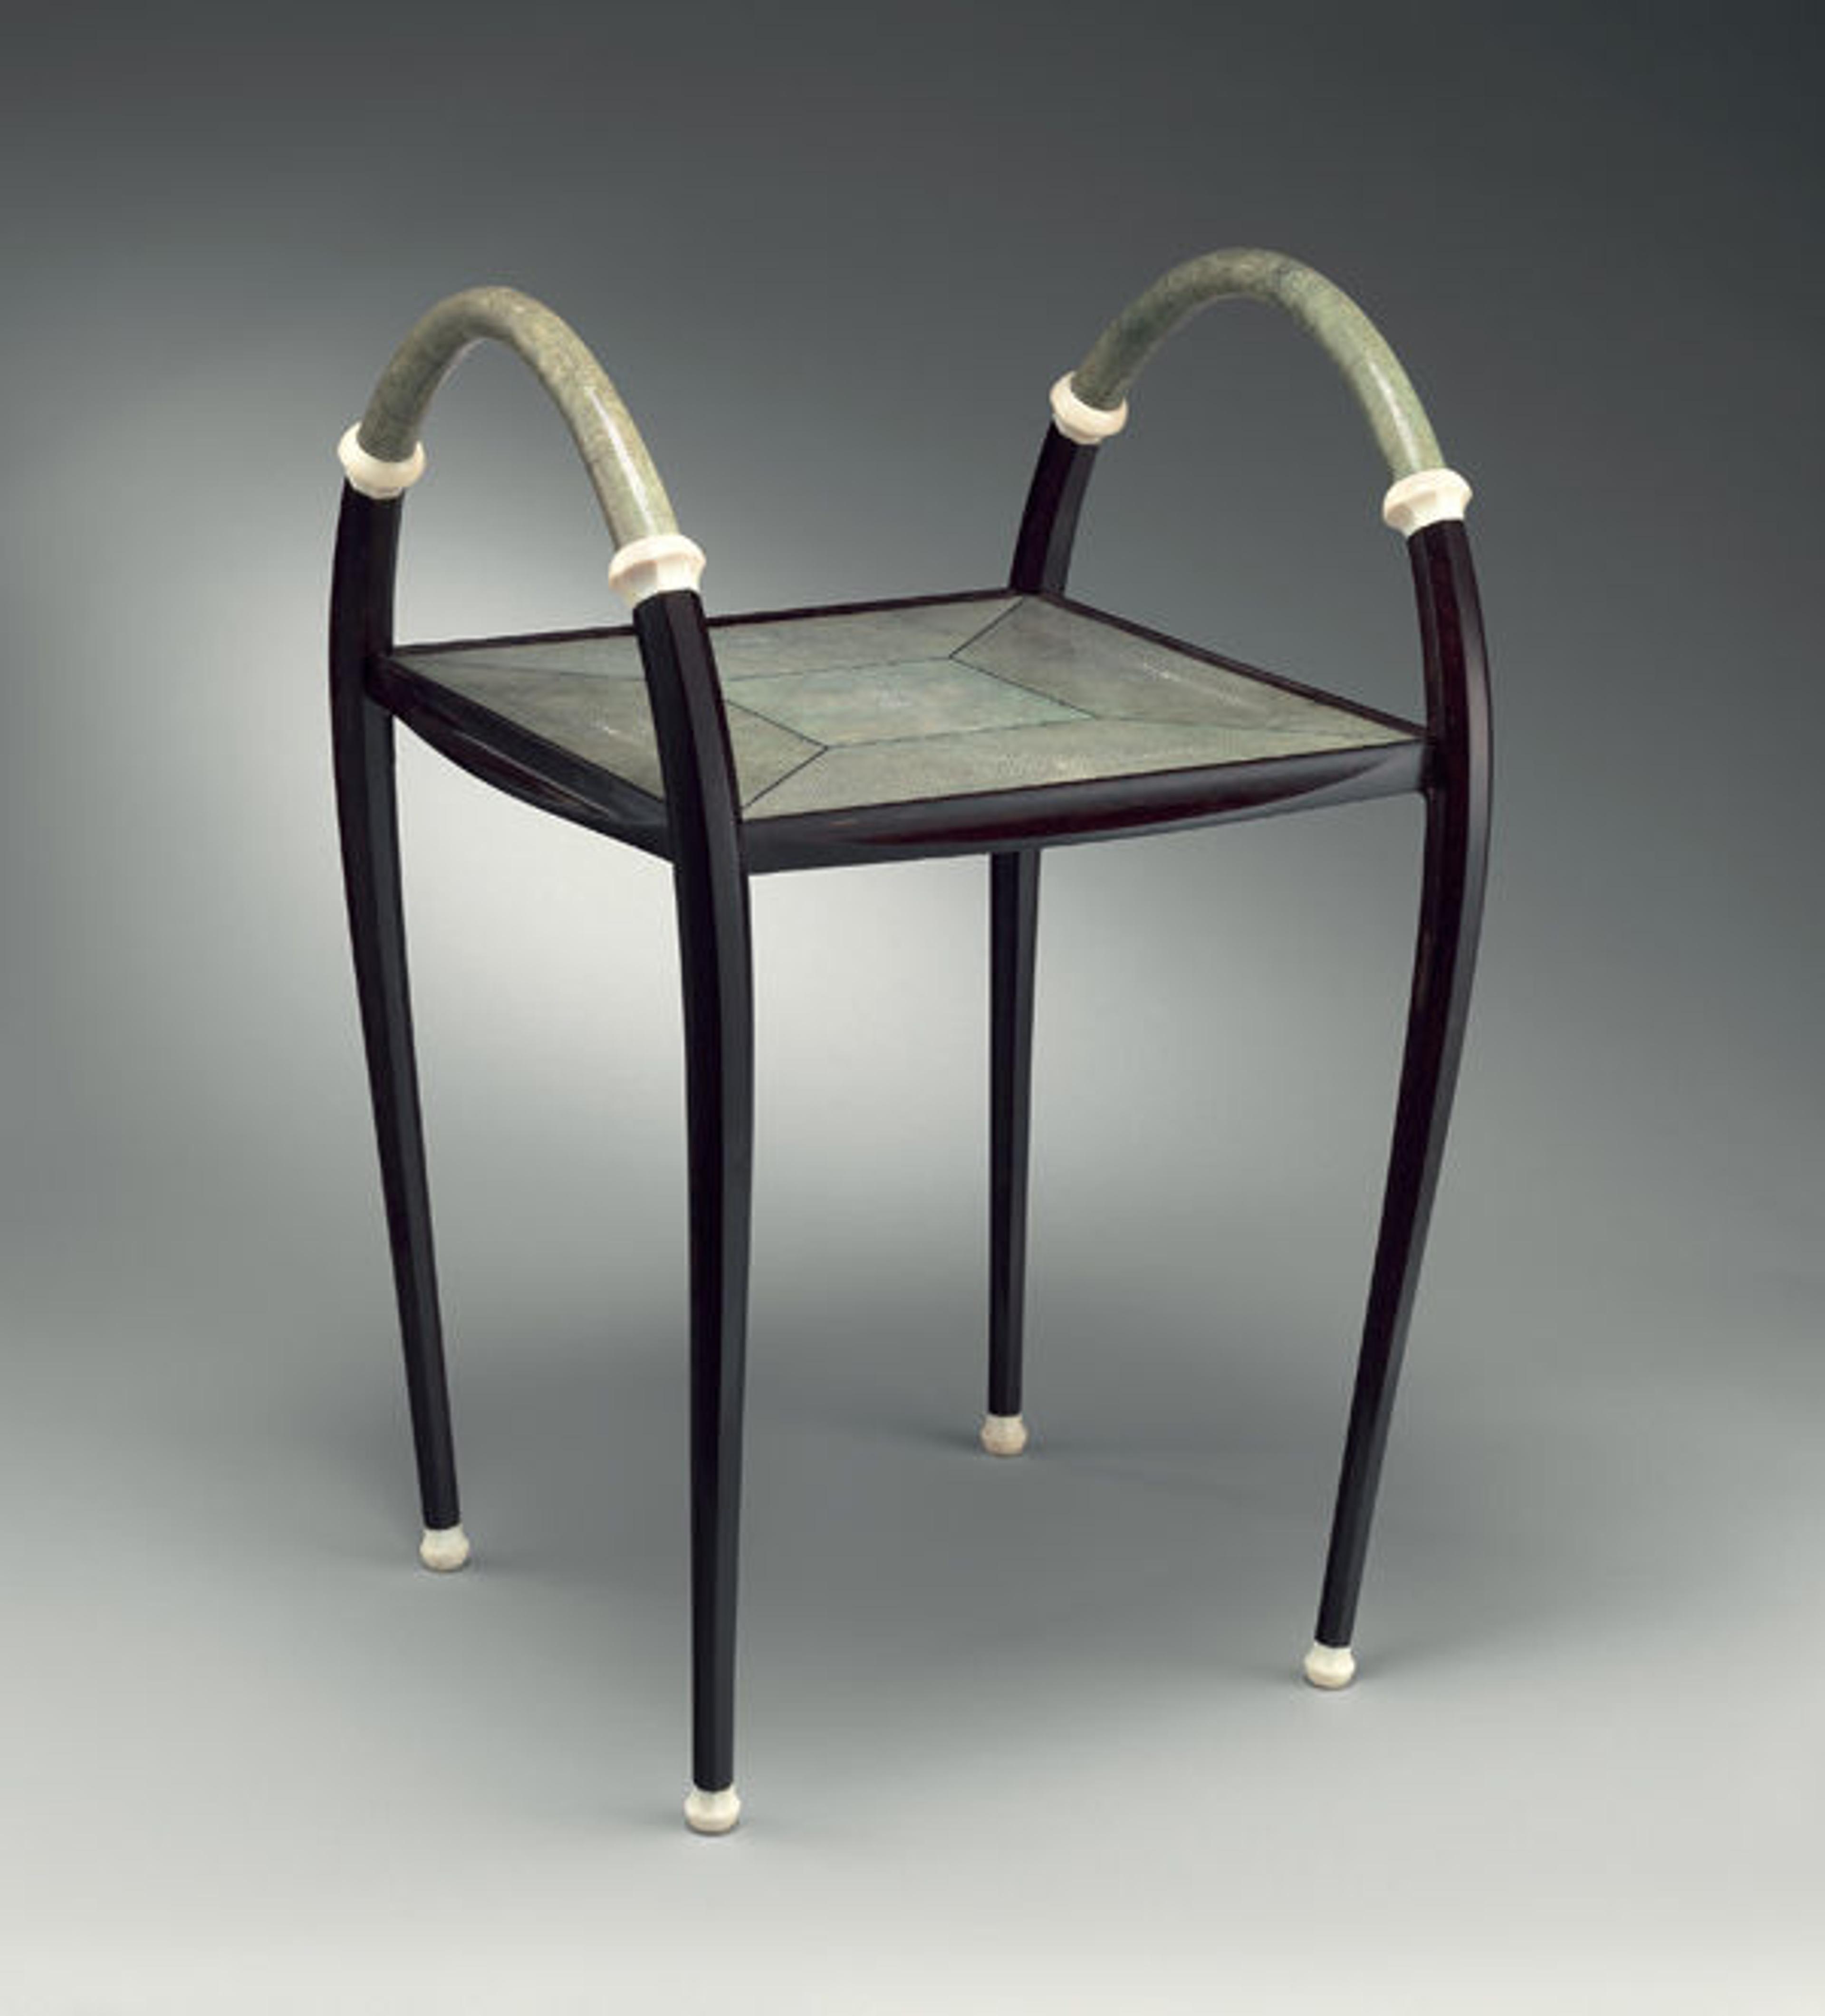 Beautiful objects like this table made of precious materials, including galuchat (a leather made from ray or fish skin), require special care. Clément Rousseau (French, 1872–1950). Table, 1924. Ebony, sharkskin, and ivory; H. 29 1/2 in., W. 18 1/2 in., D. 18 1/2 in. (74.9 x 47.0 x 47.0 cm). The Metropolitan Museum of Art, New York, Fletcher Fund, 1972 (1972.283.2)